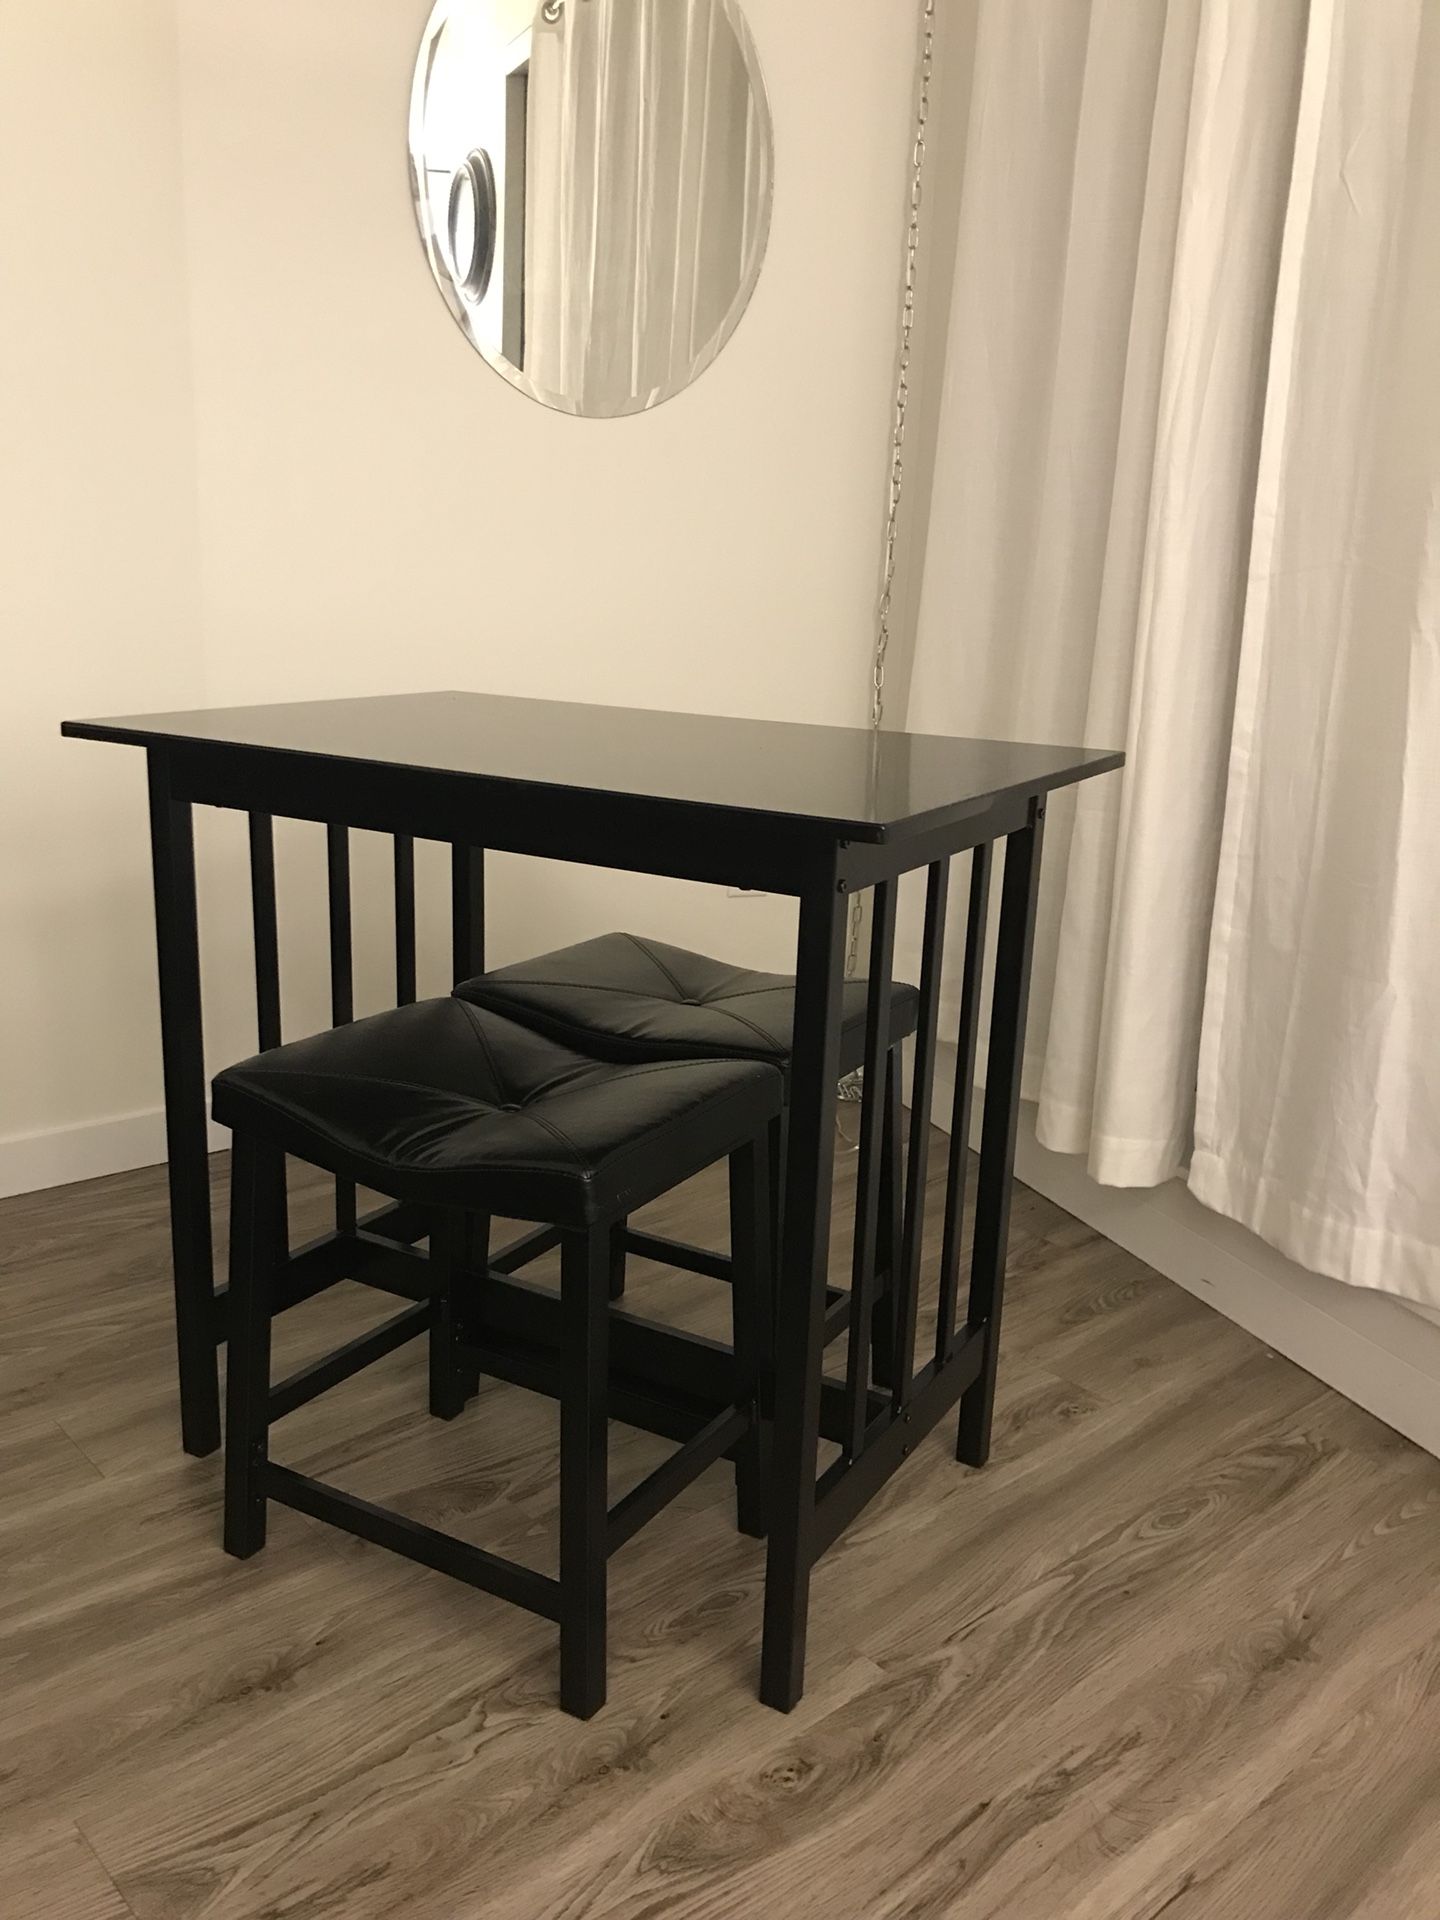 BRAND NEW- SMALL DINING TABLE